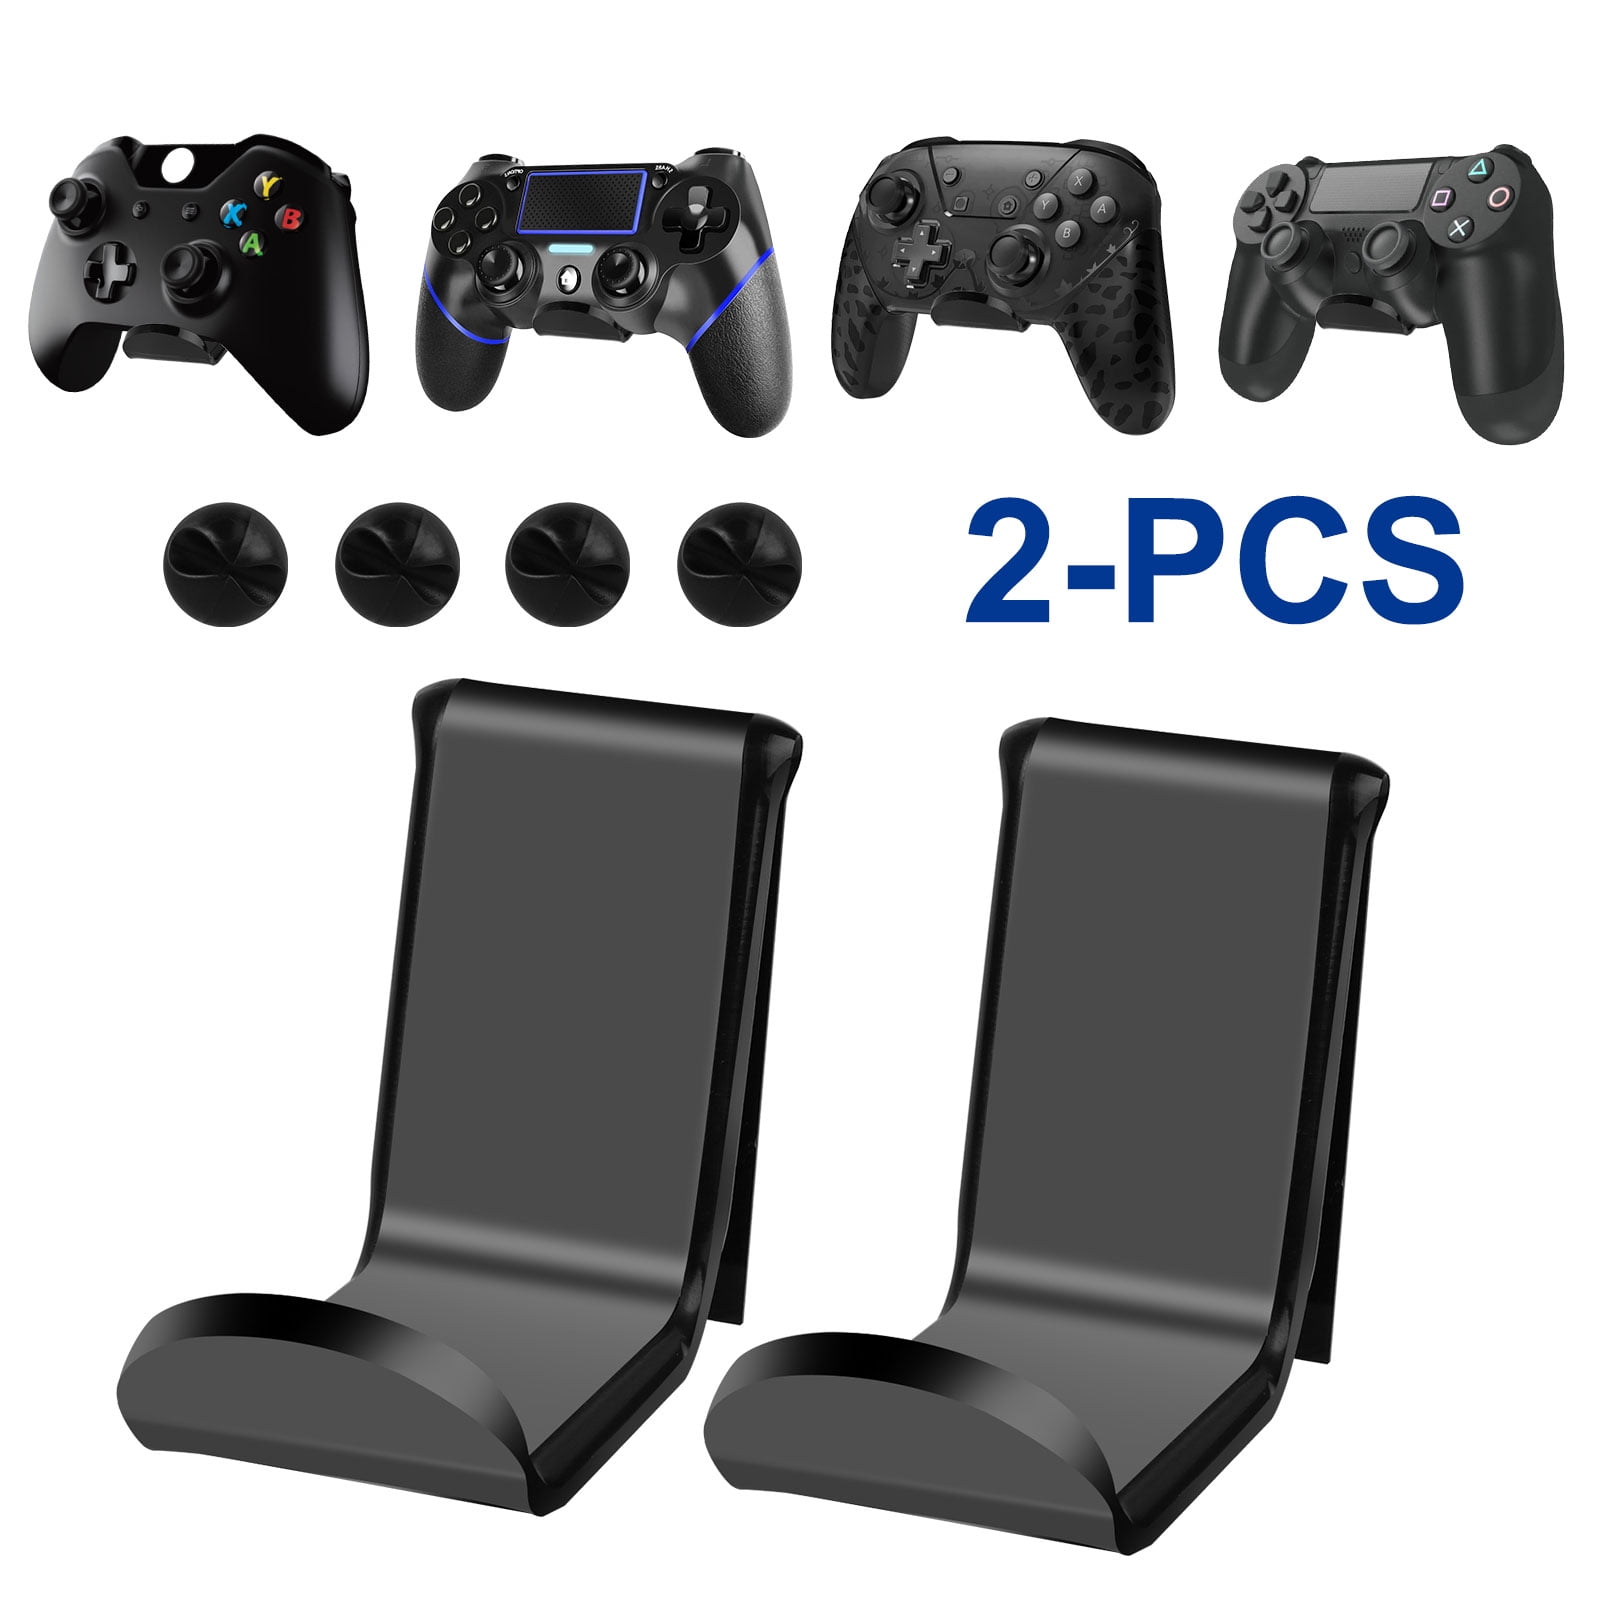 EEEkit 2-Pack Acrylic Headphone Stand Game Controller Mount Display Stand Hook Hanger Fit for Xbox One / PS4/ Nintendo Switch PC Gamepad, - Walmart.com